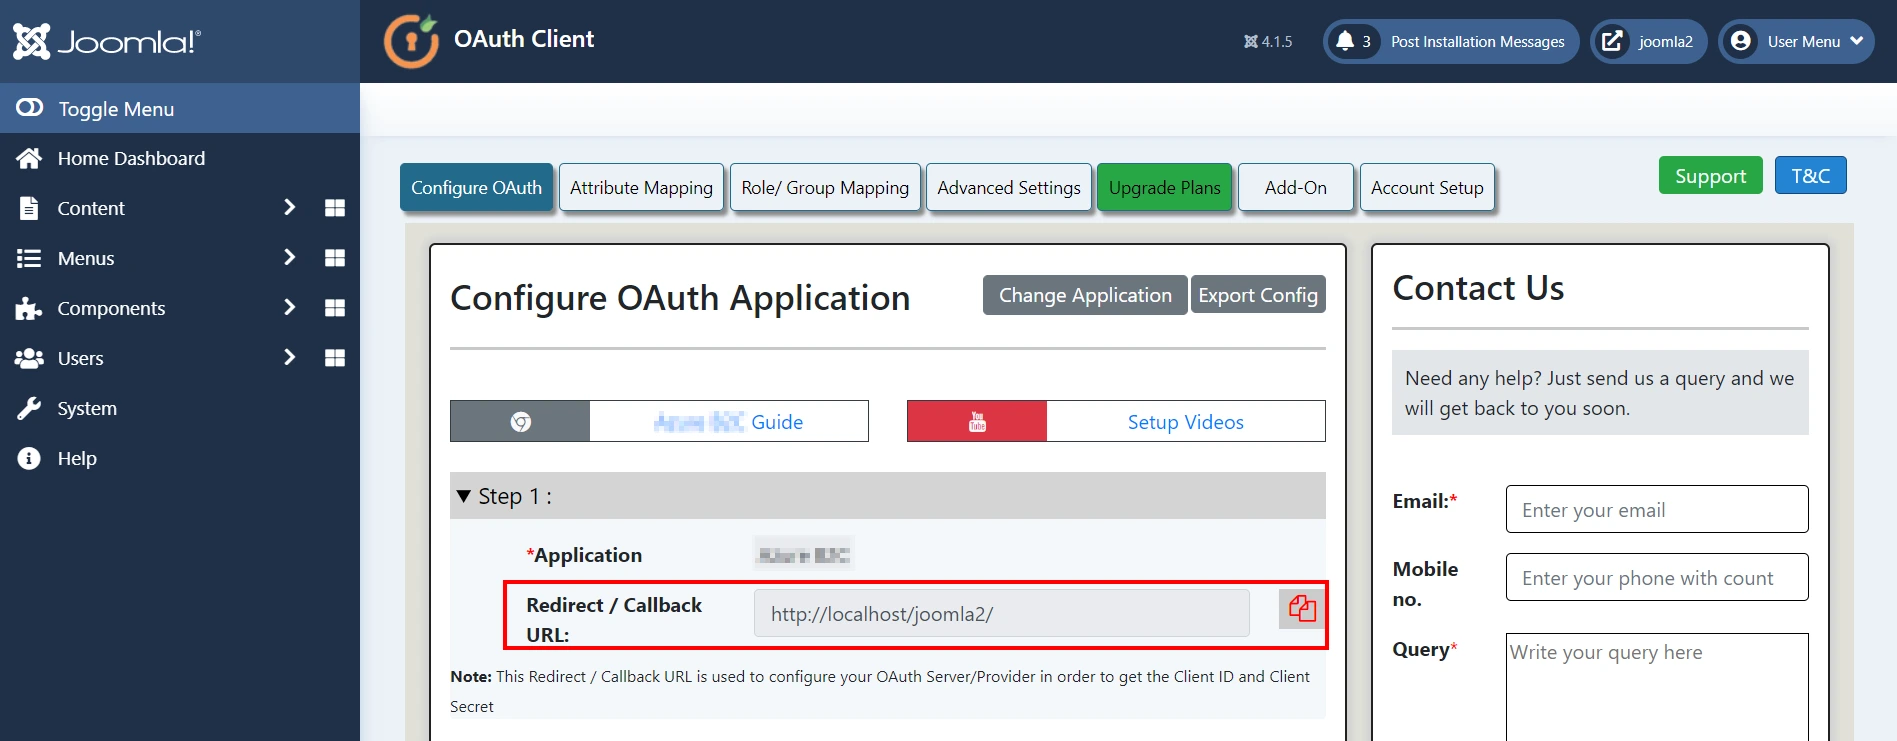 Google Apps,  SSingle Sign-On (SSO) OAuth/OpenID 